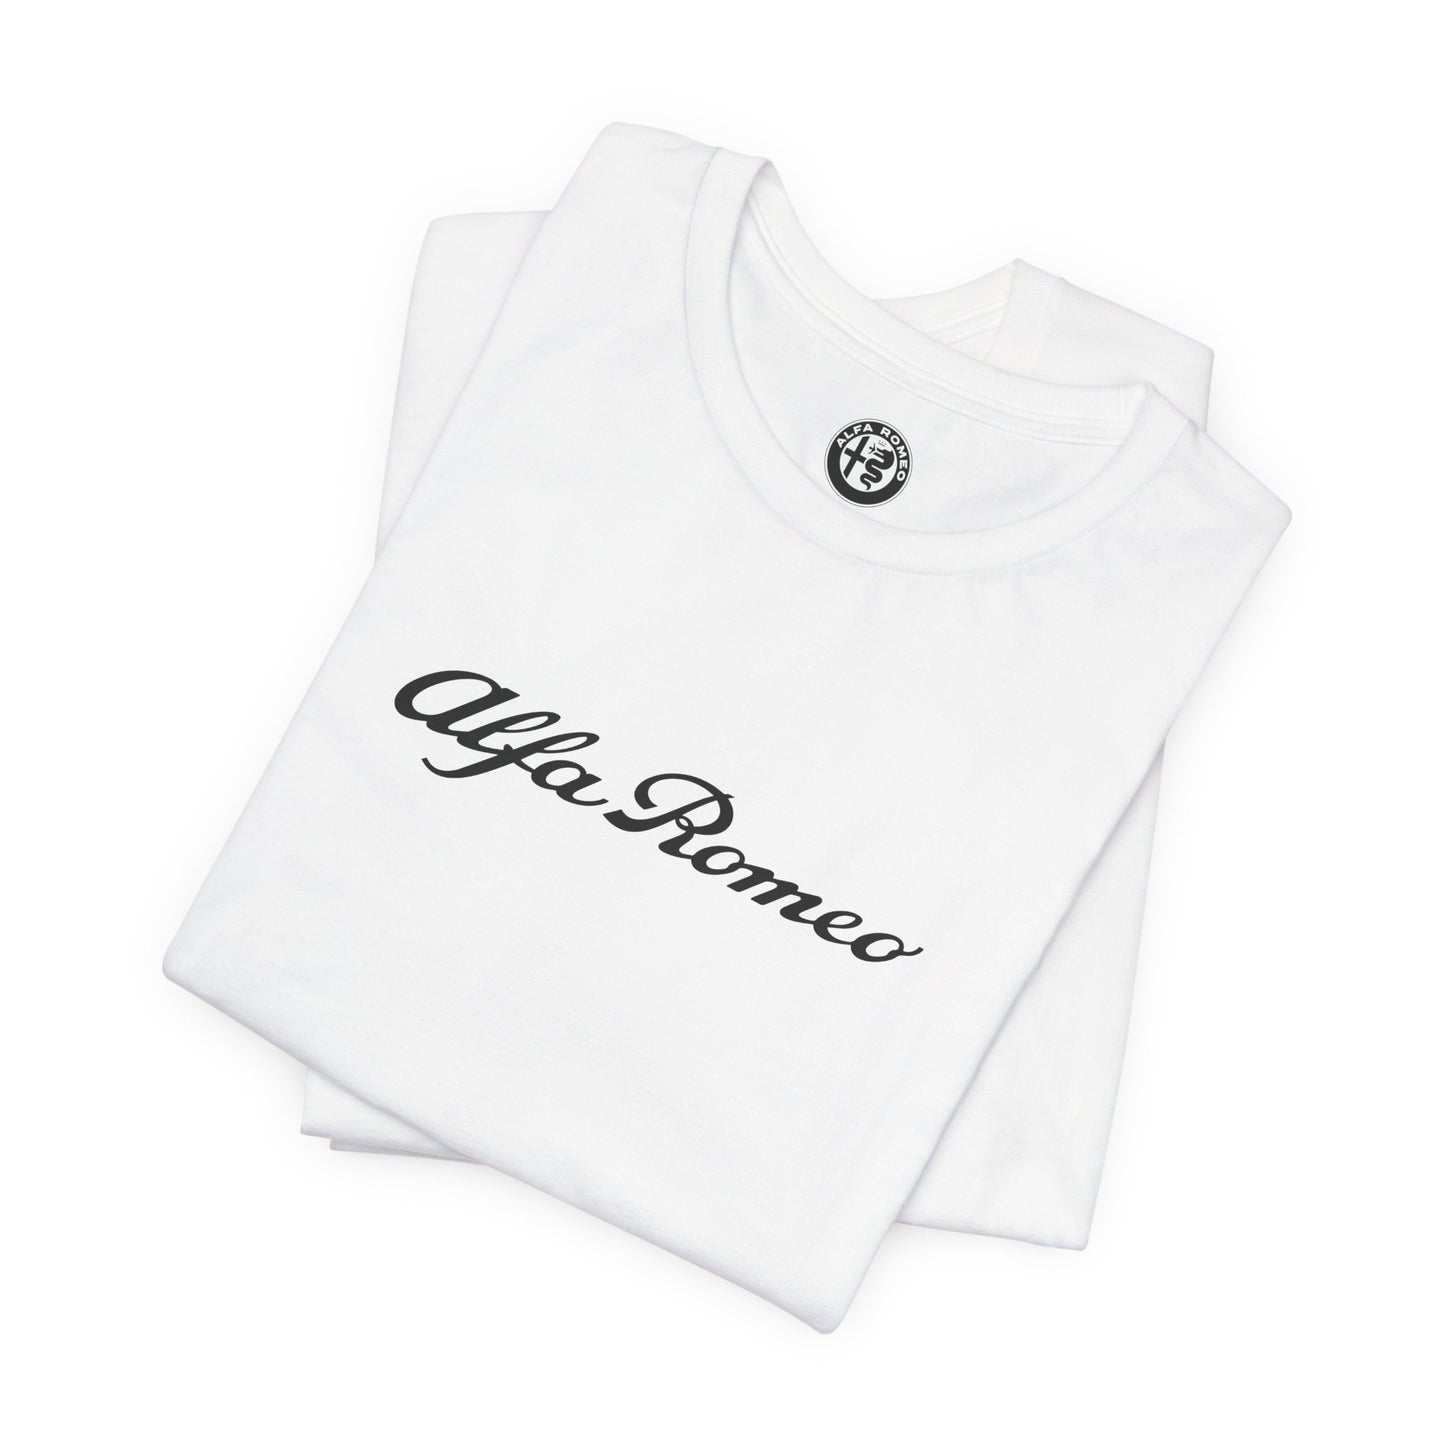 Alfa Romeo Bella+Canvas Short Sleeve Tee - Ethical Unisex Cotton T-Shirt - Made in USA